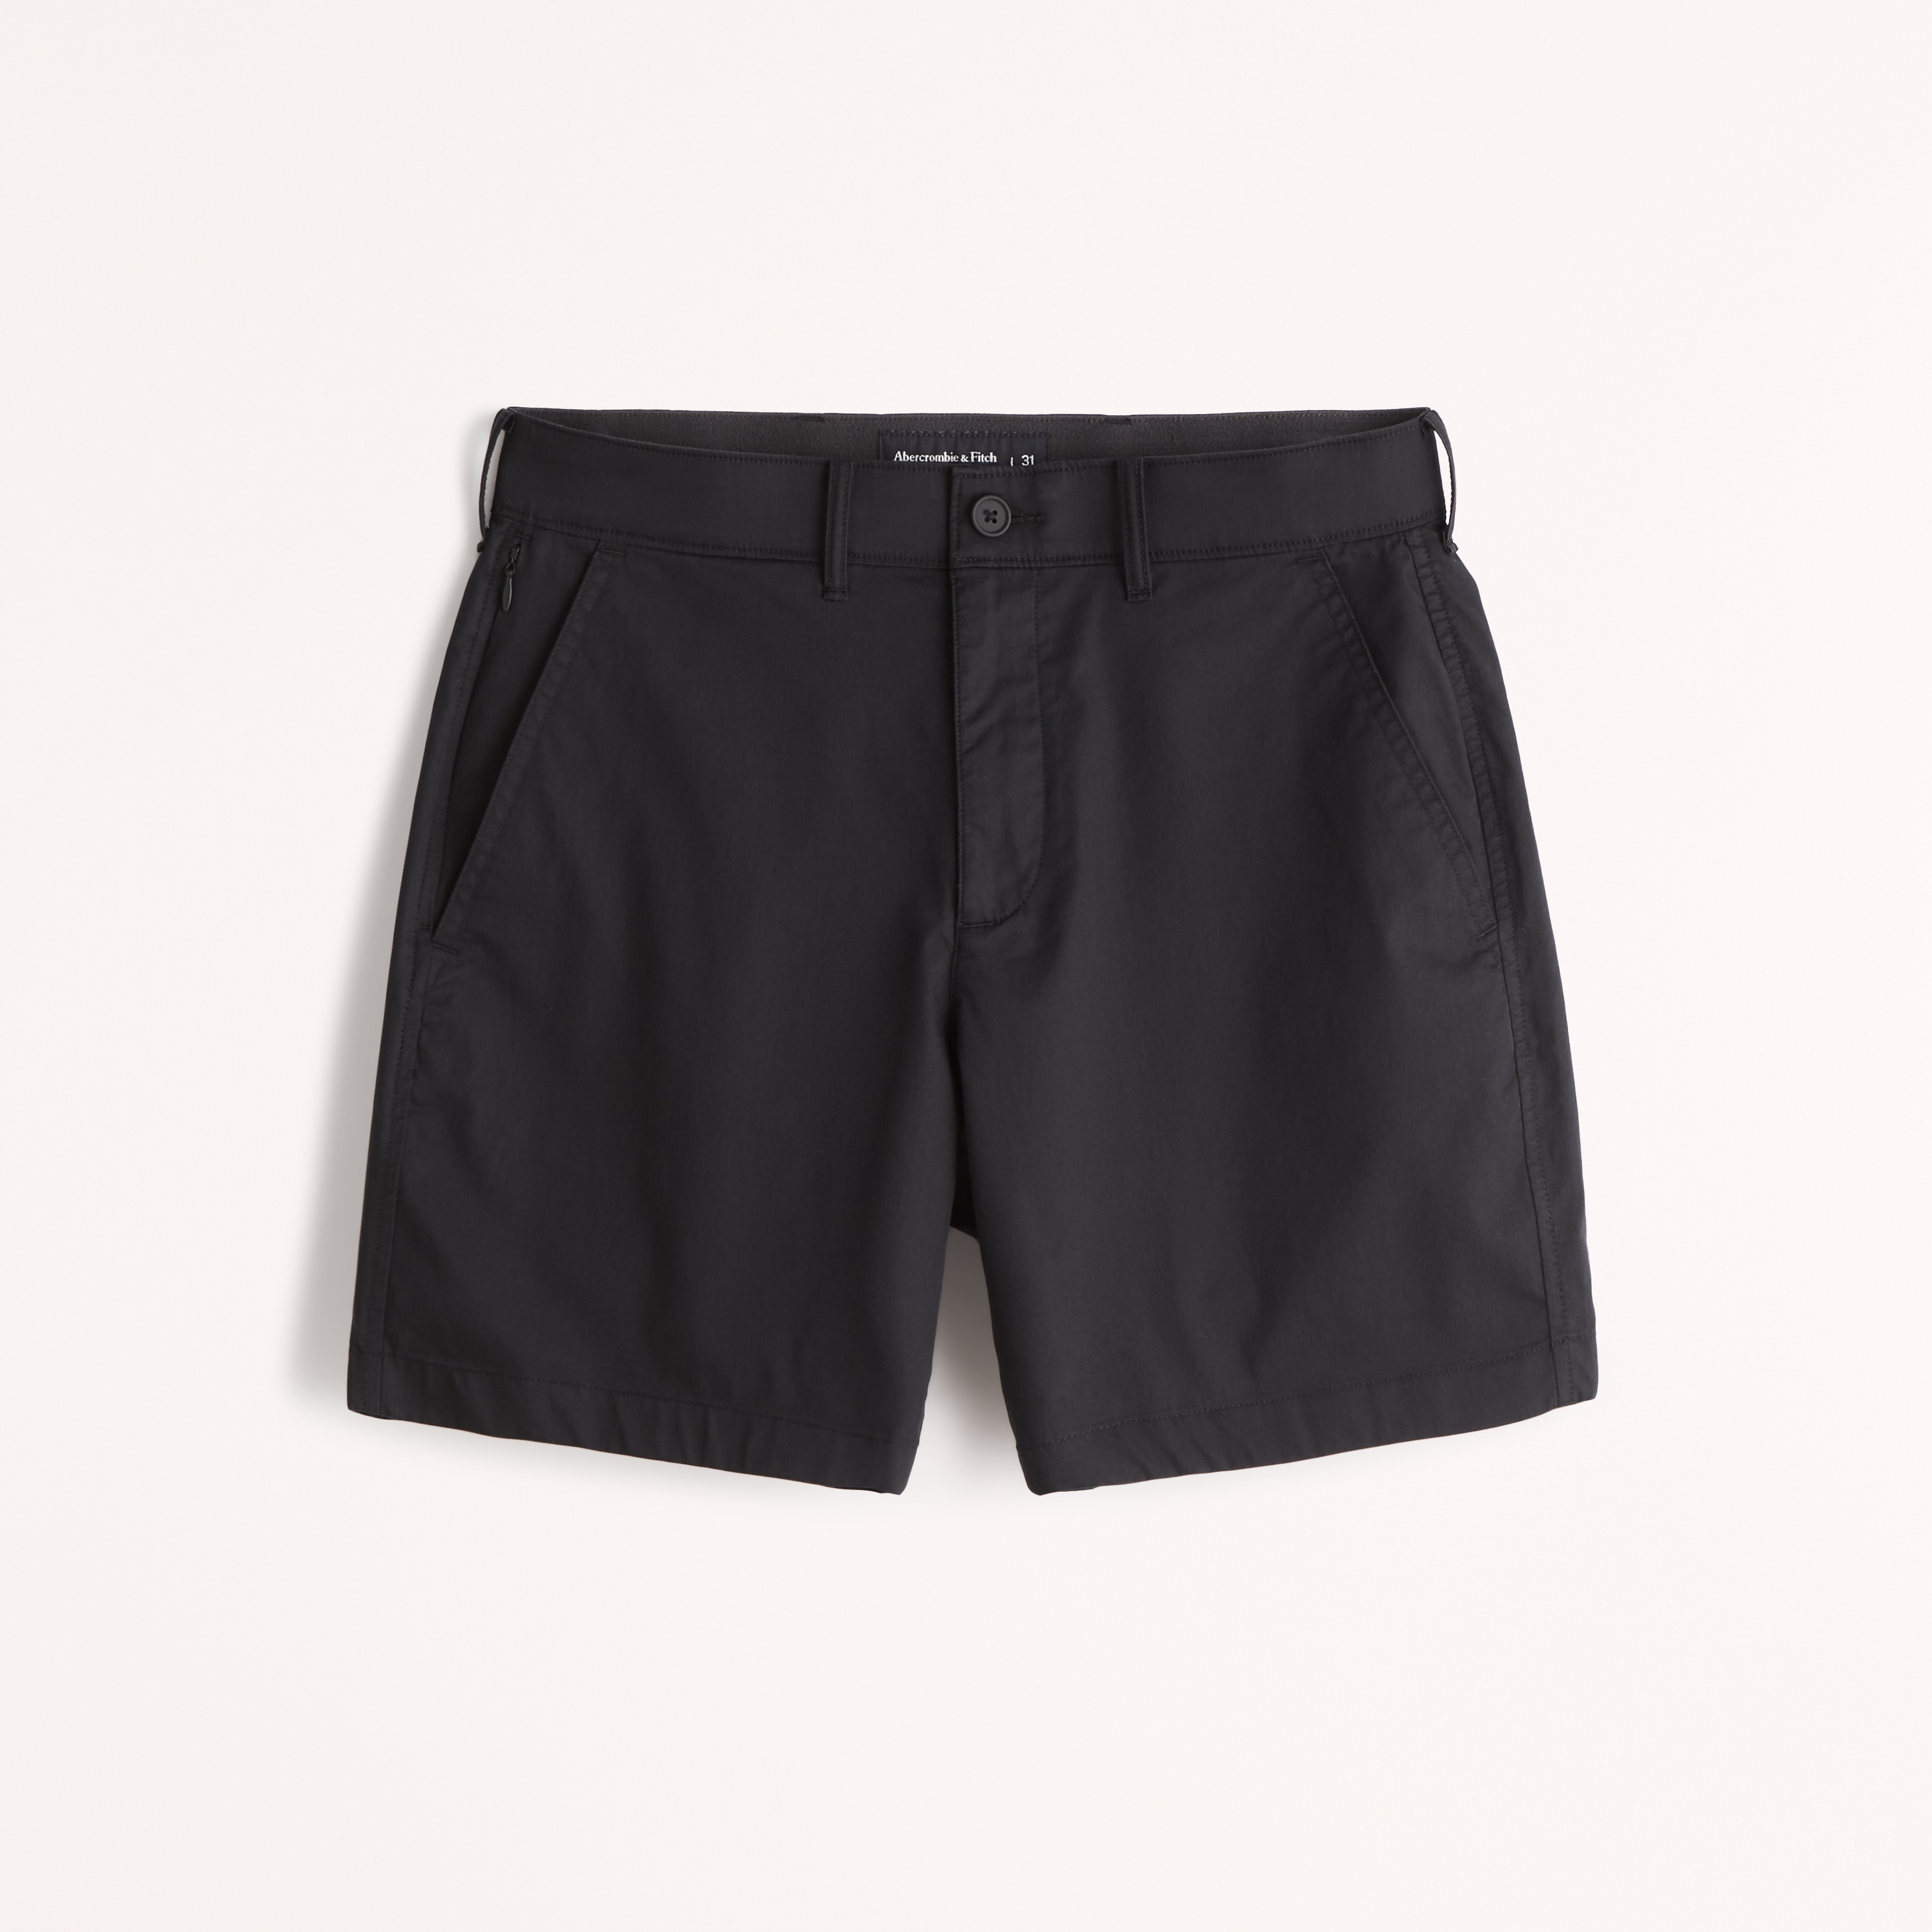 A&F 7 Inch All-Day Short